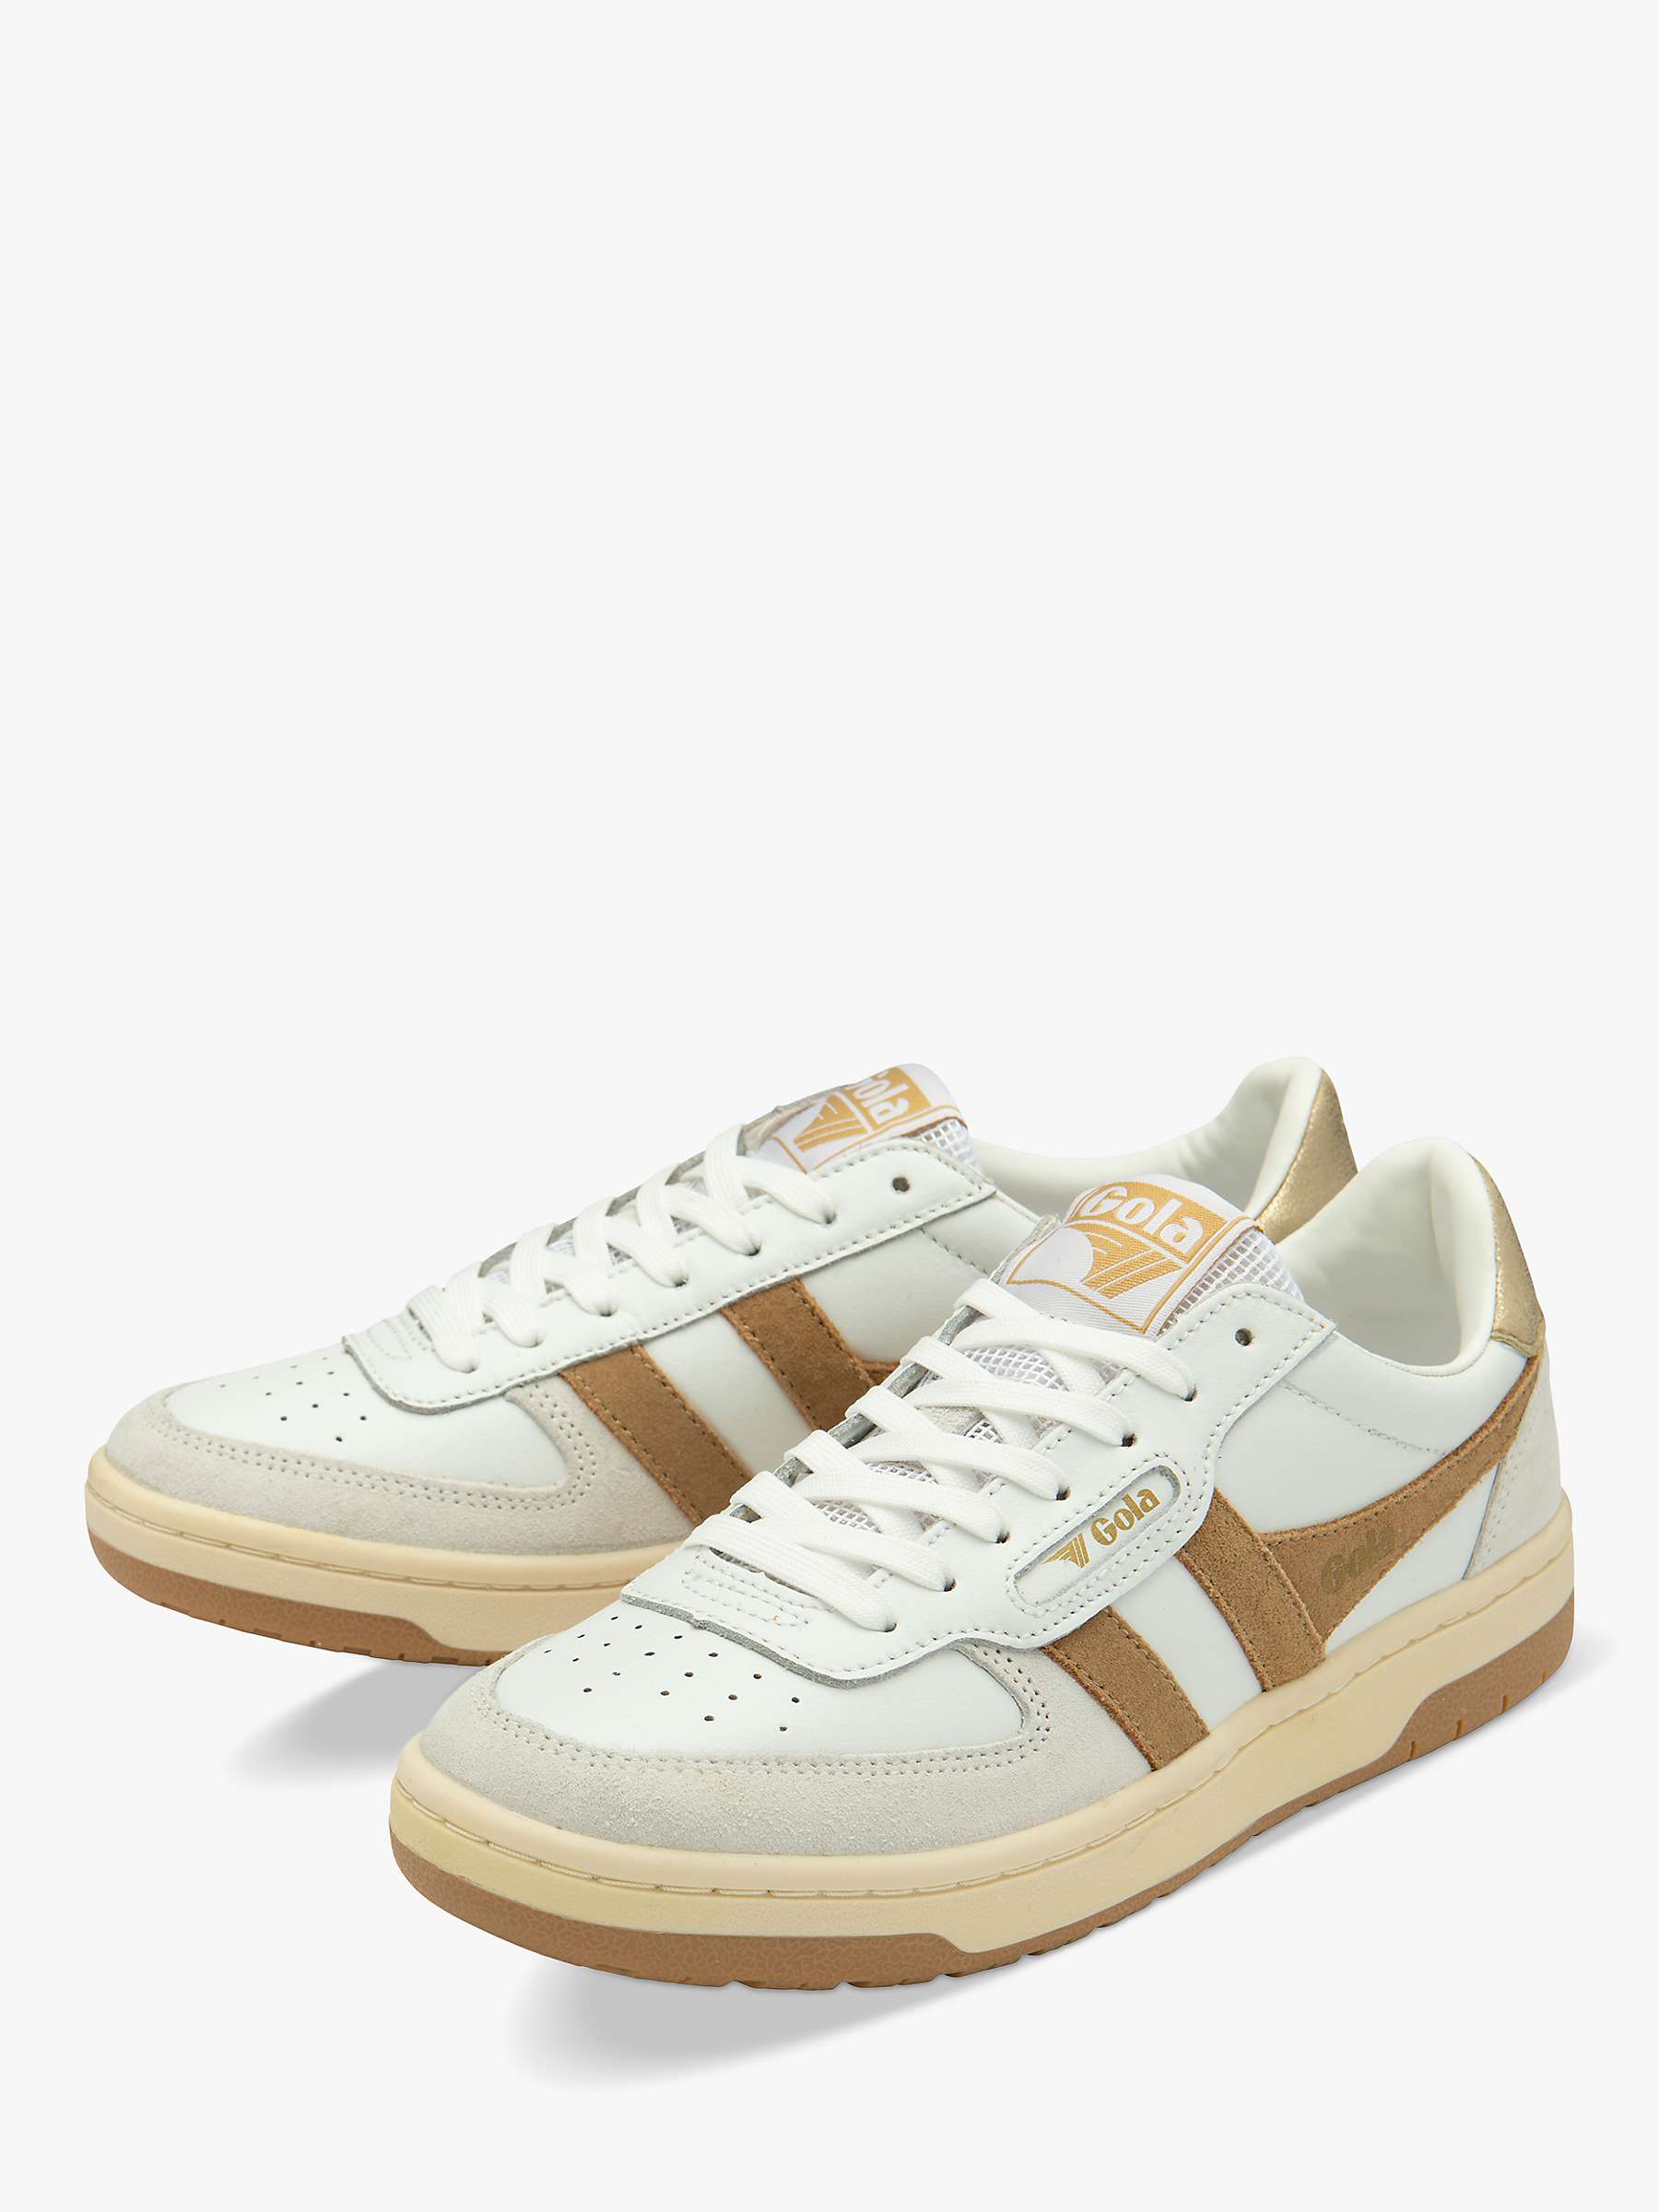 Buy Gola Classics Hawk Leather Lace Up Trainers, White/Caramel/Gold Online at johnlewis.com